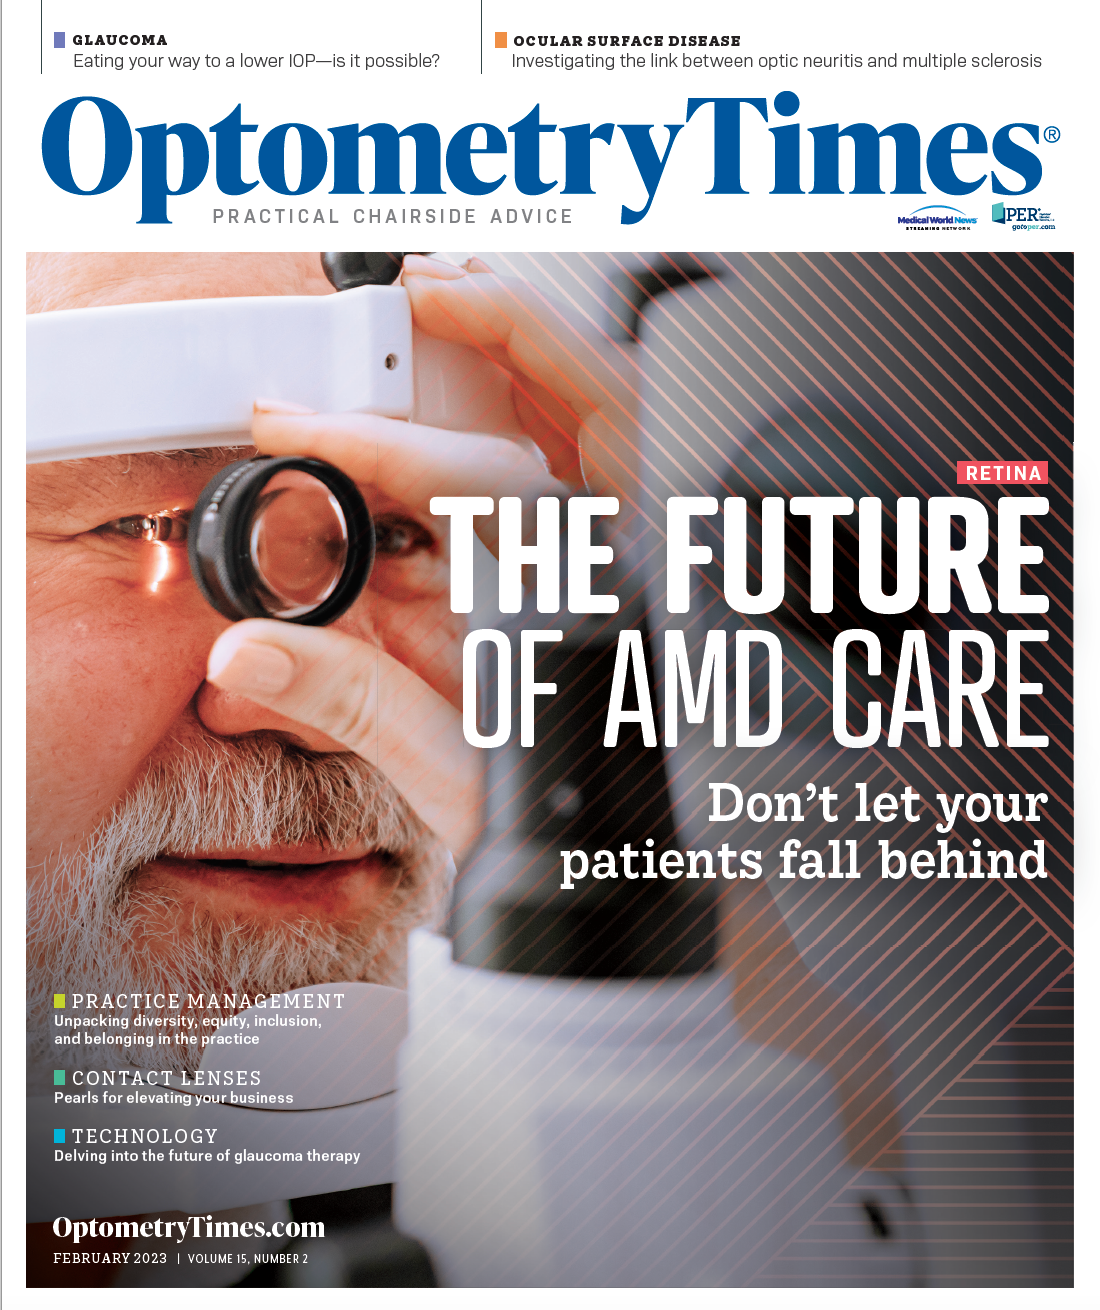 Optometry Times February 2023 issue